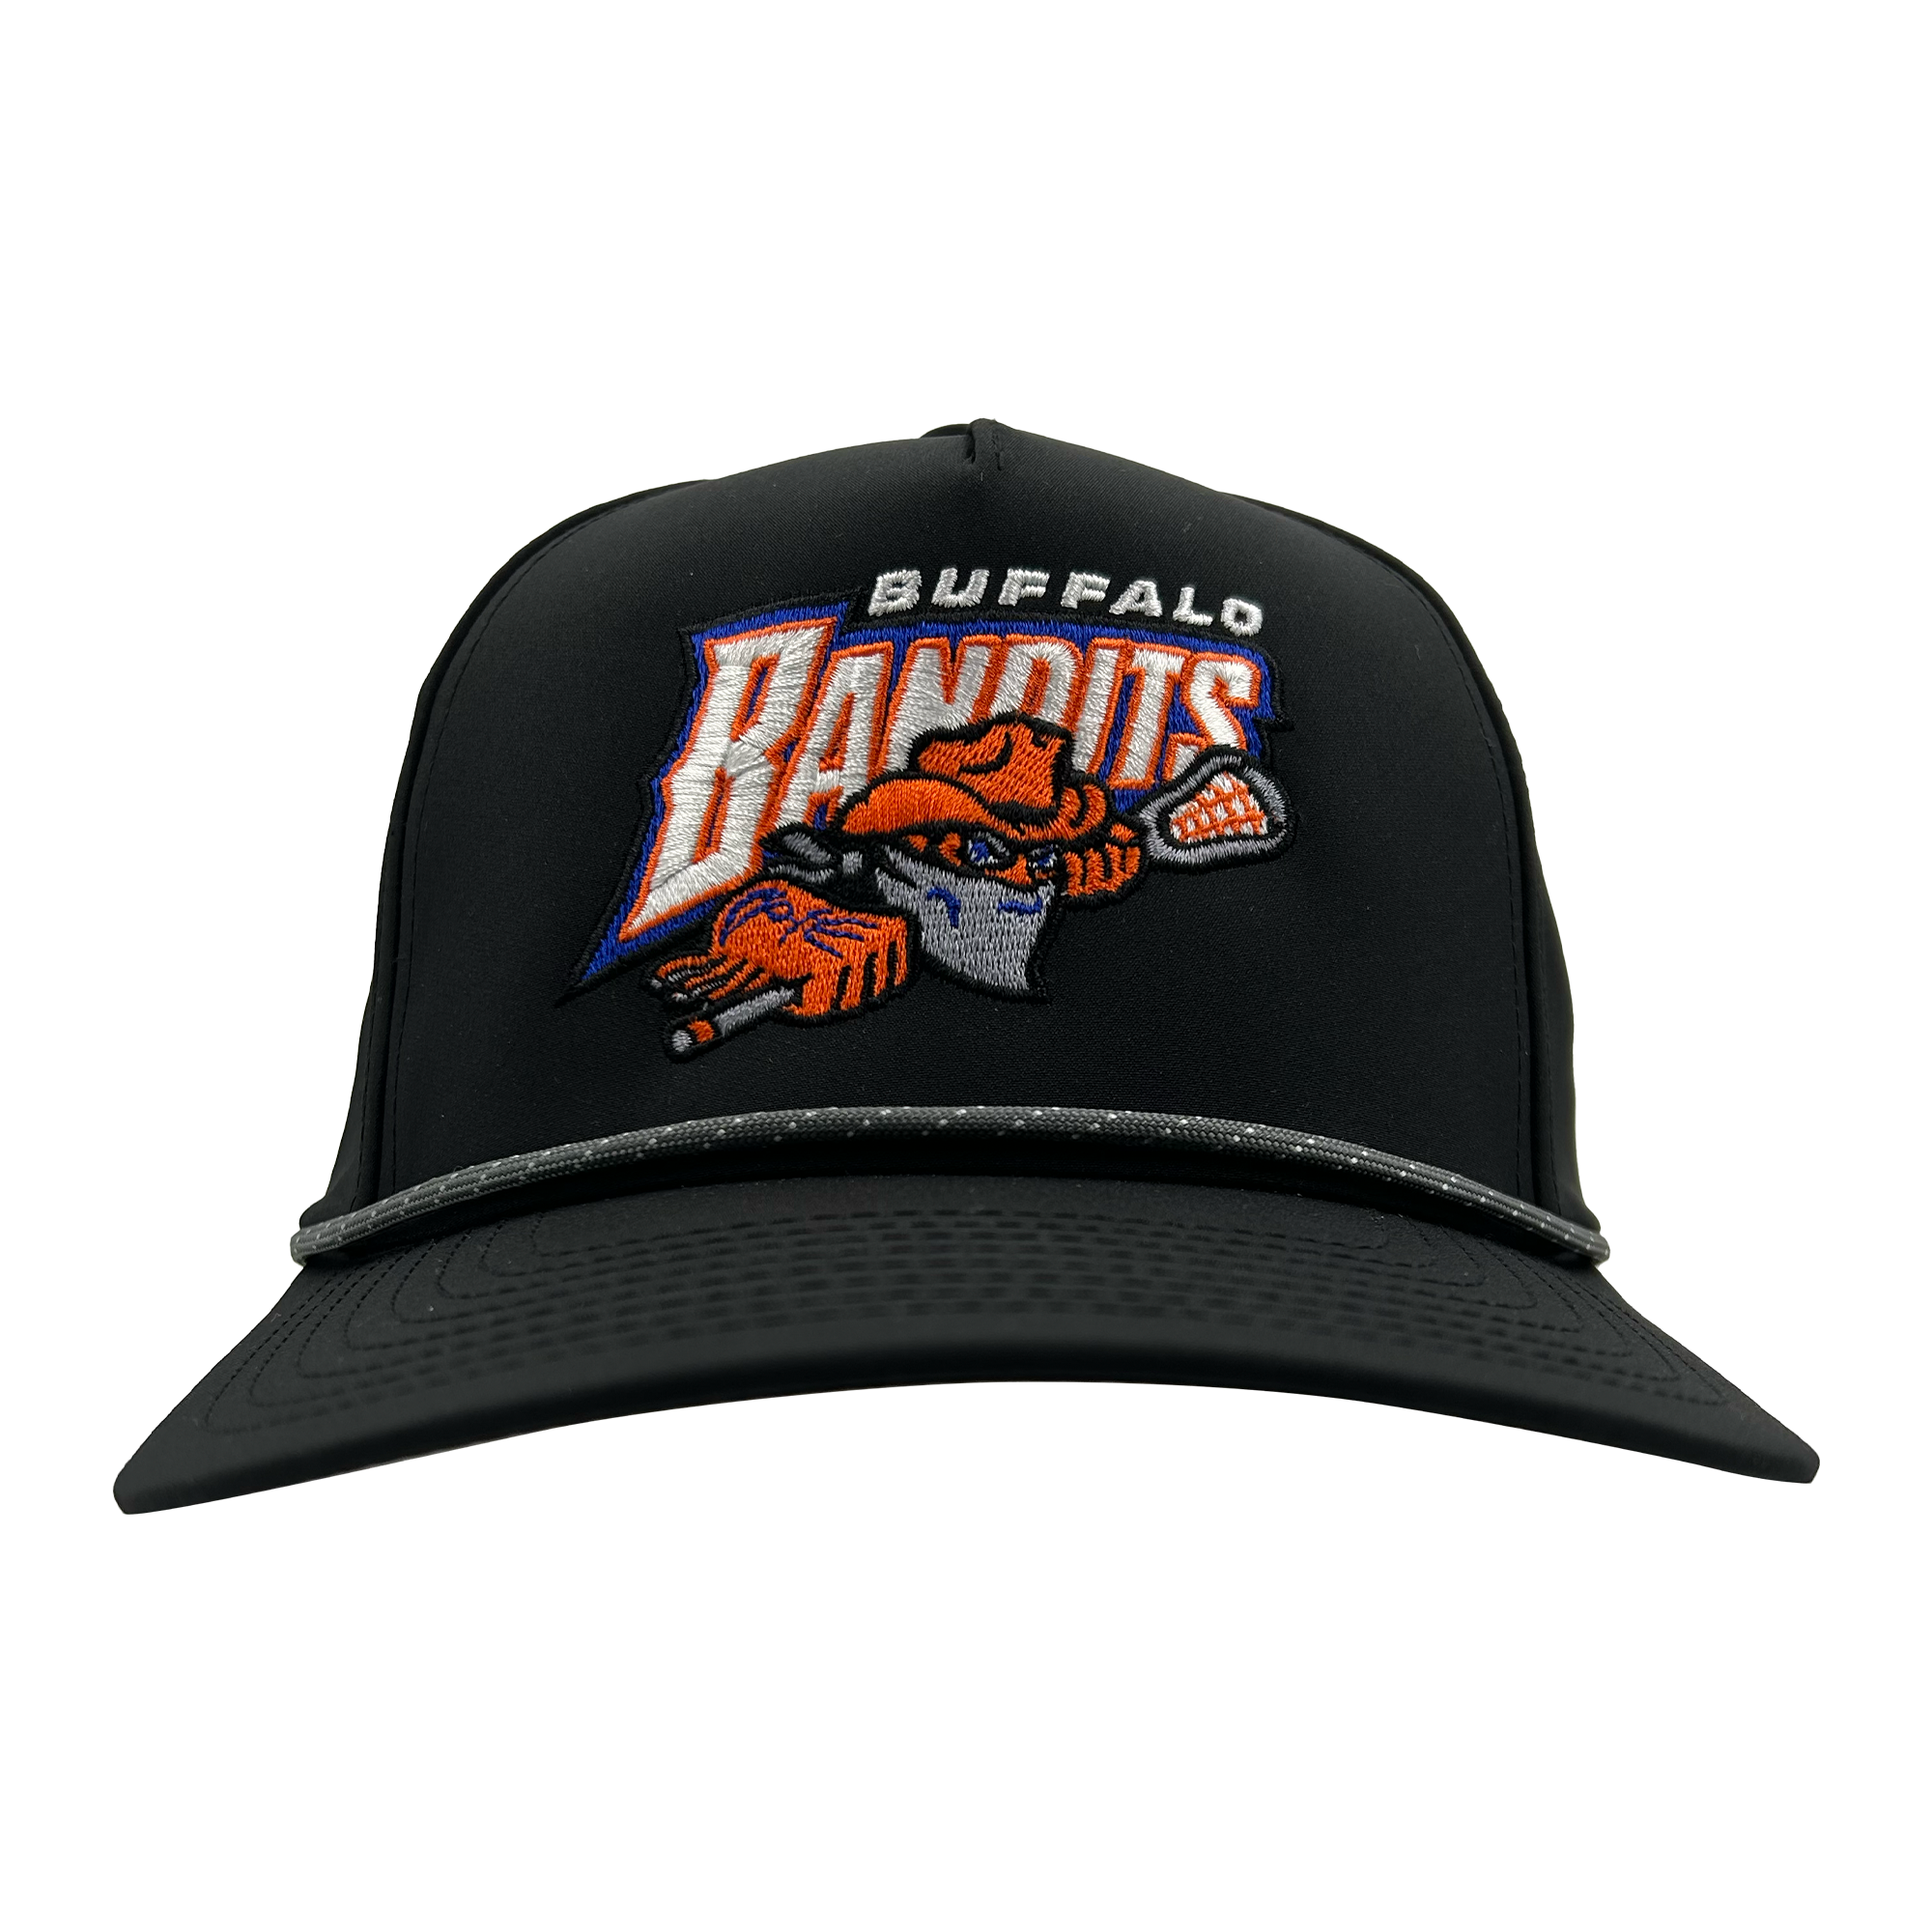 Buffalo Bandits With logo Black With Gray Rope Hat